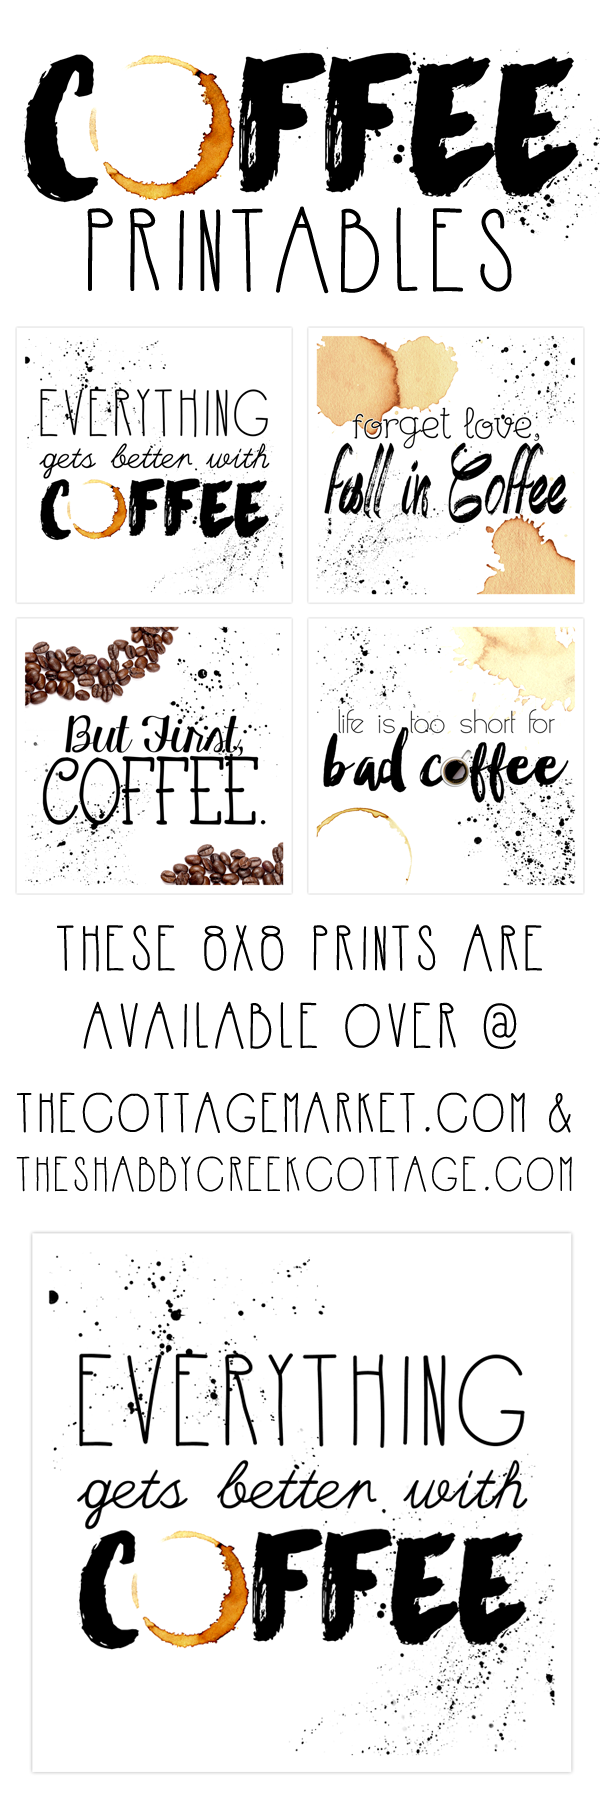 Free Printable Art: the coffee collection